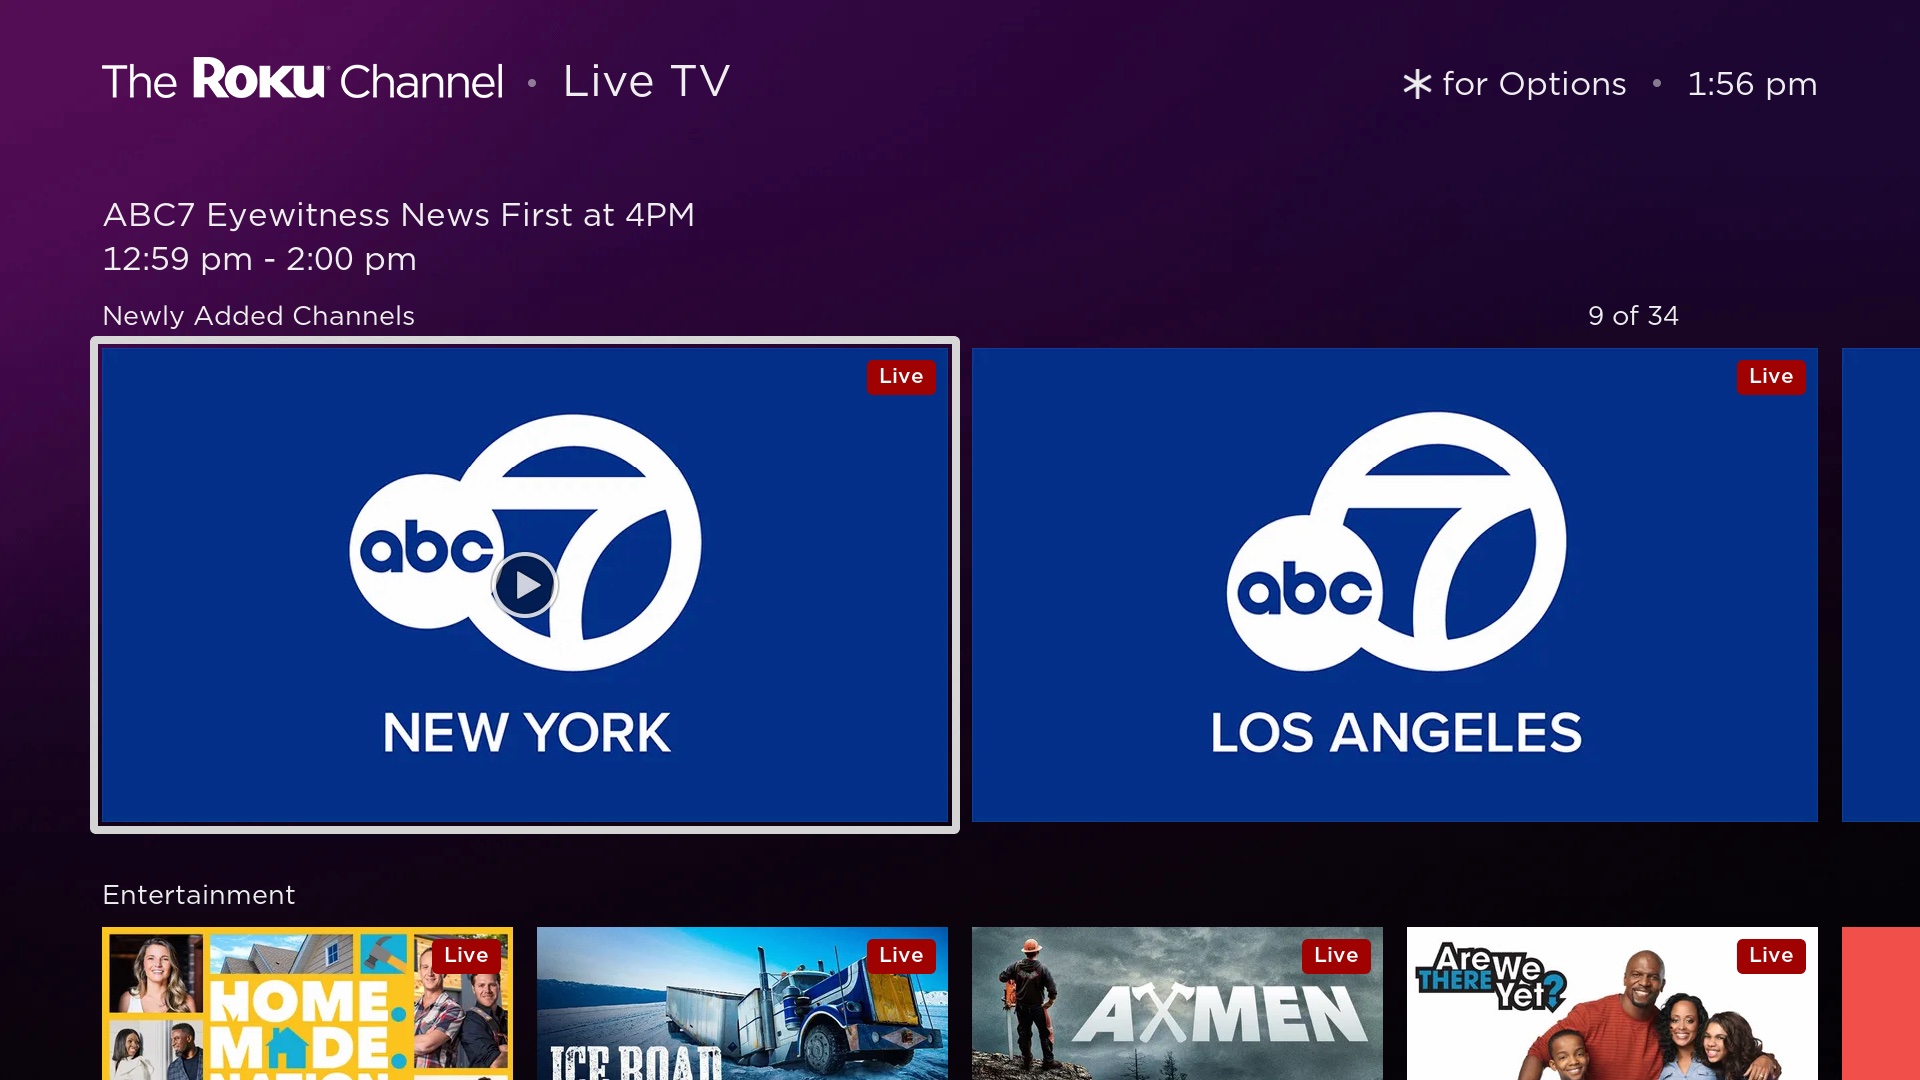 If you have a Roku, you're getting 17 new TV channels for free this month